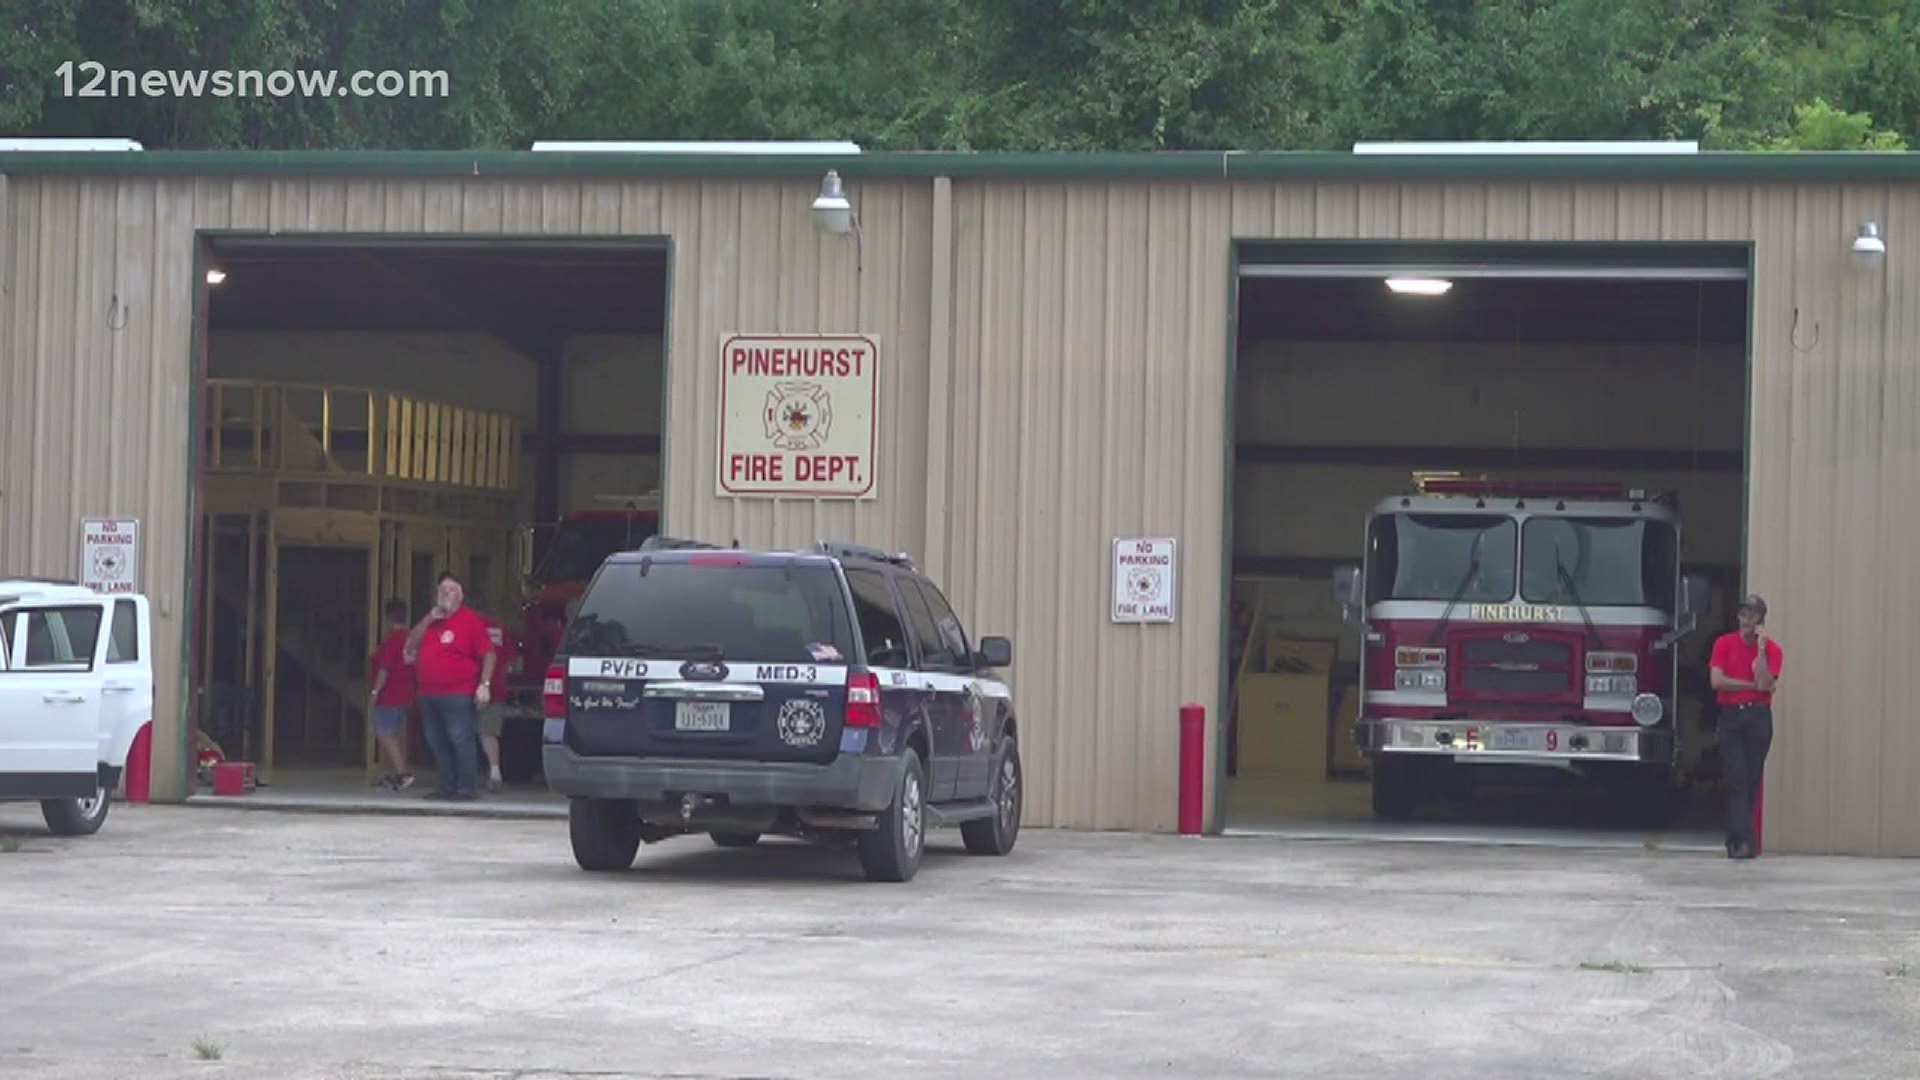 The city administrator says the City of Orange Fire Department is providing services to Pinehurst, and medical services will continue to be provided by Acadian